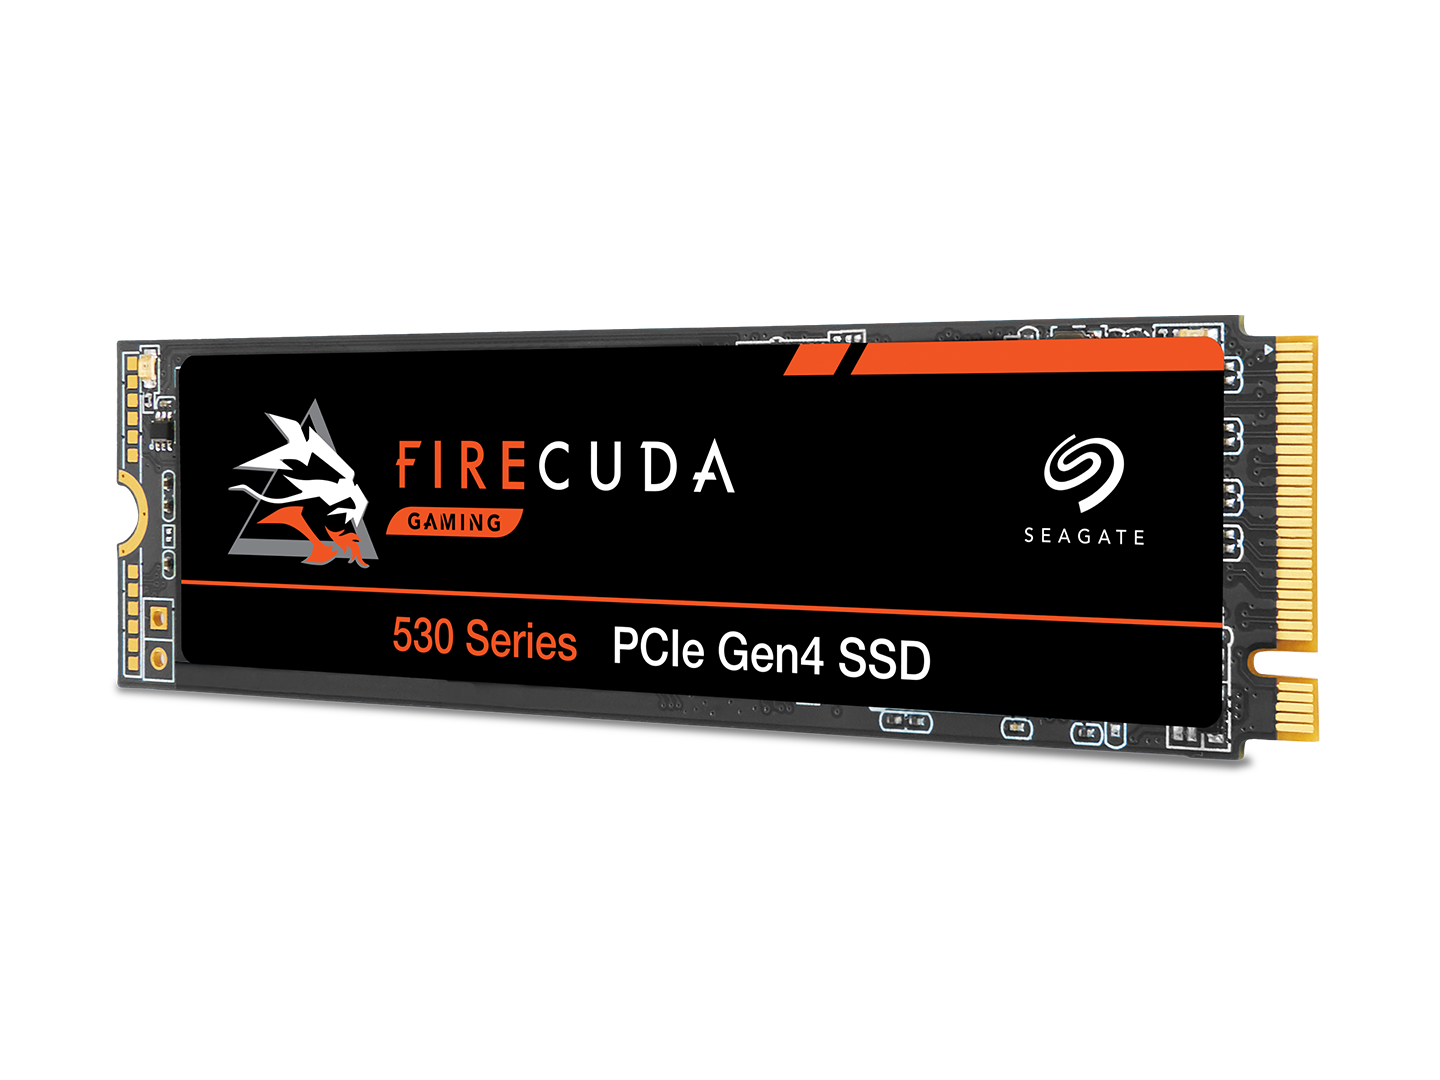 Seagate FireCuda 530 Review: Simply the Best SSD - Tech Advisor